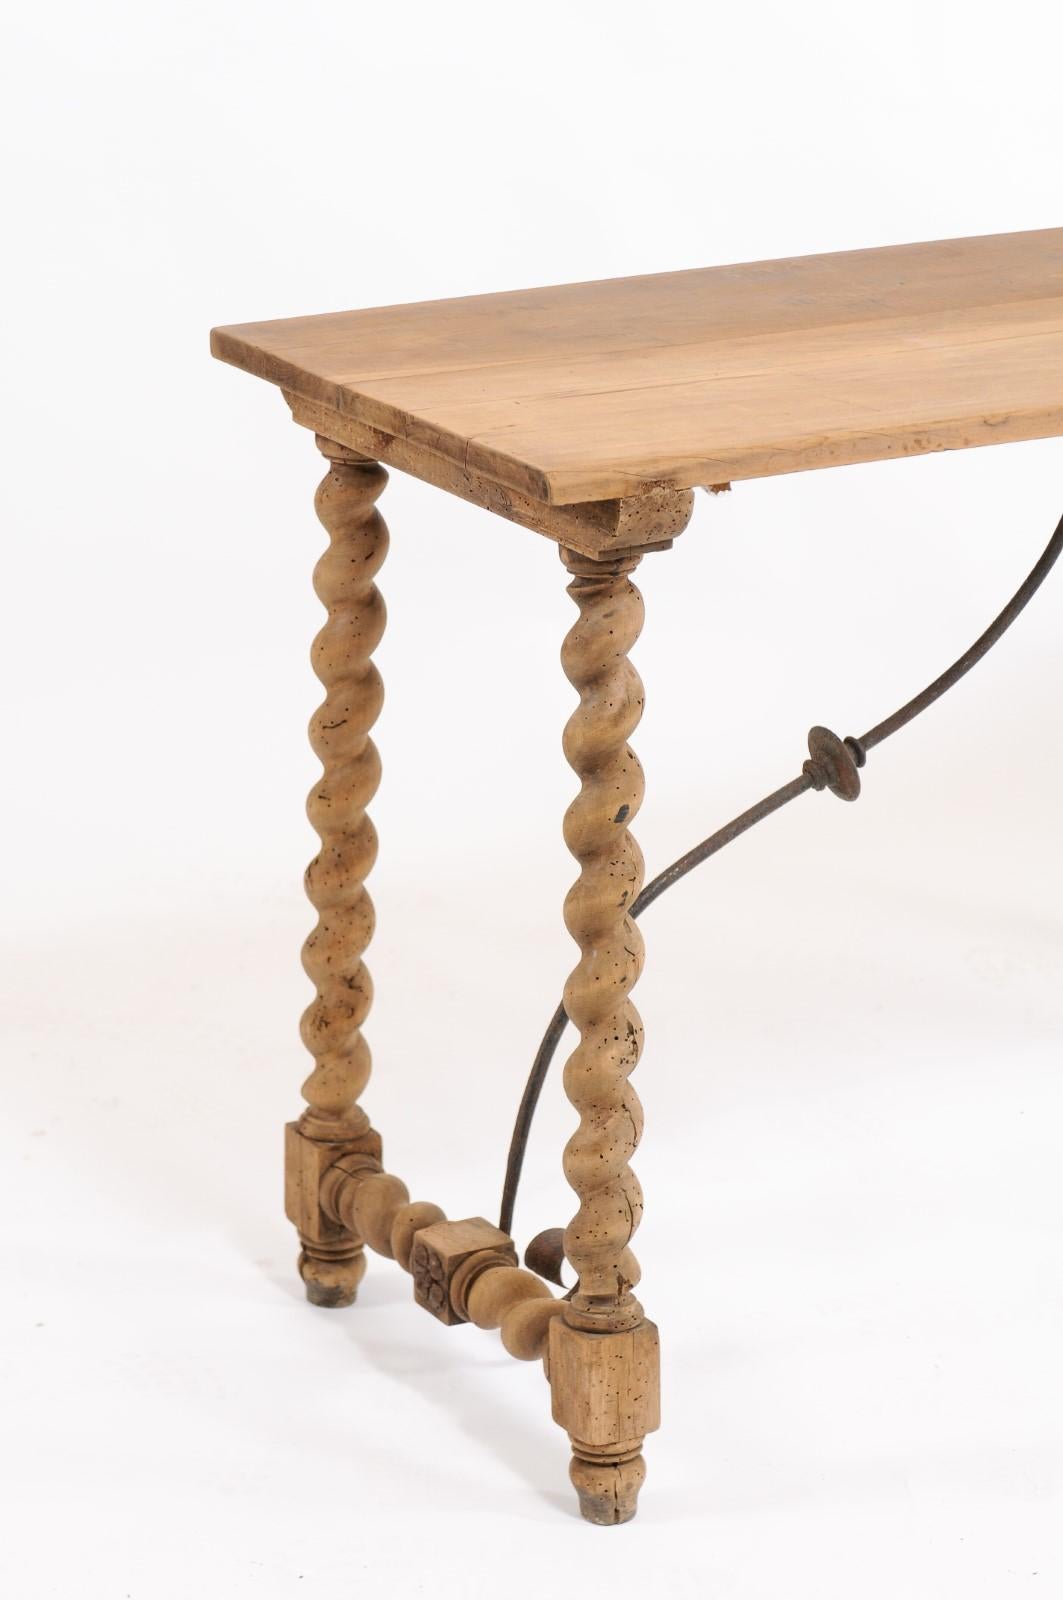 Forged Spanish 1920s Baroque Style Oak Console Table with Barley Twist Trestle Base